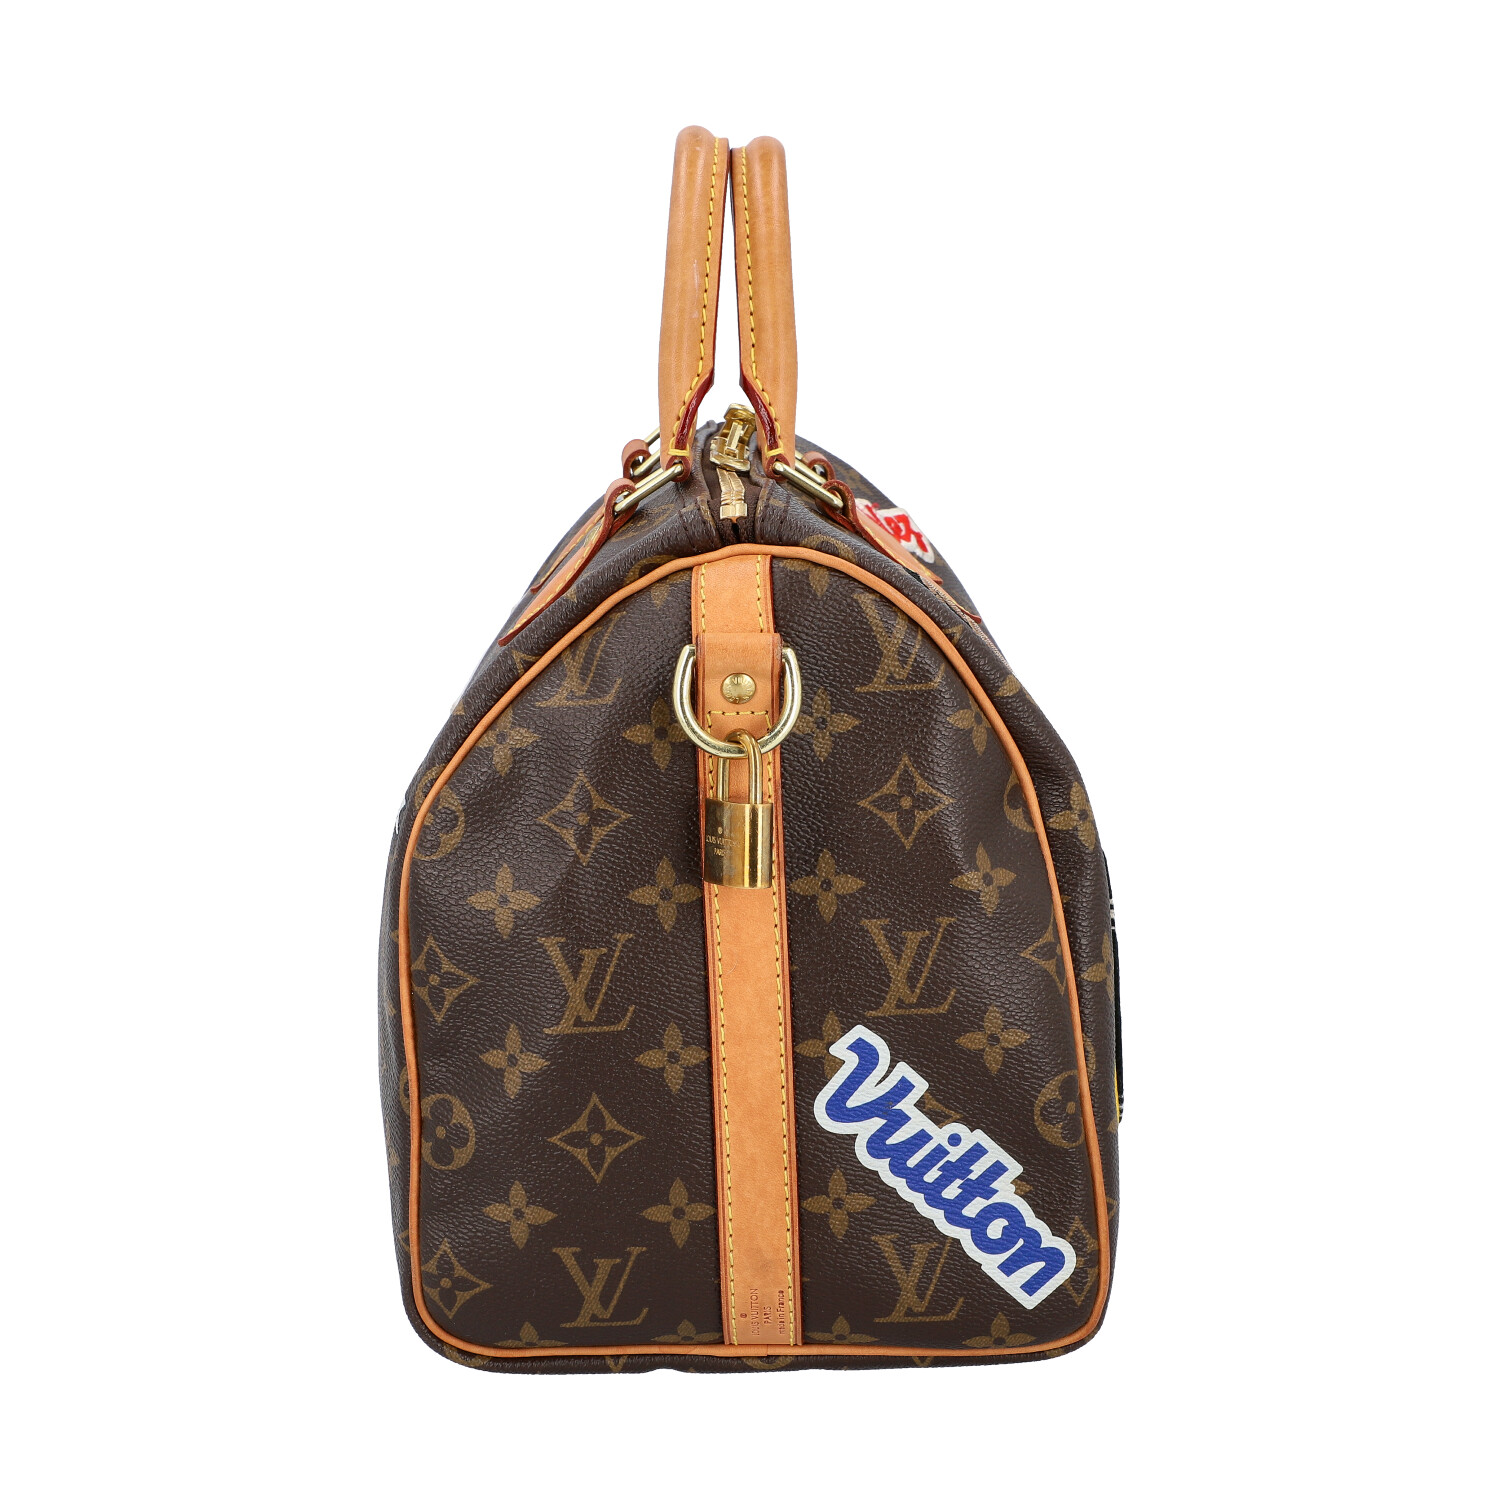 LOUIS VUITTON Handtasche "SPEEDY 30", Capsule Kollektion Hiver 2018.Limited Edition. M - Image 3 of 9